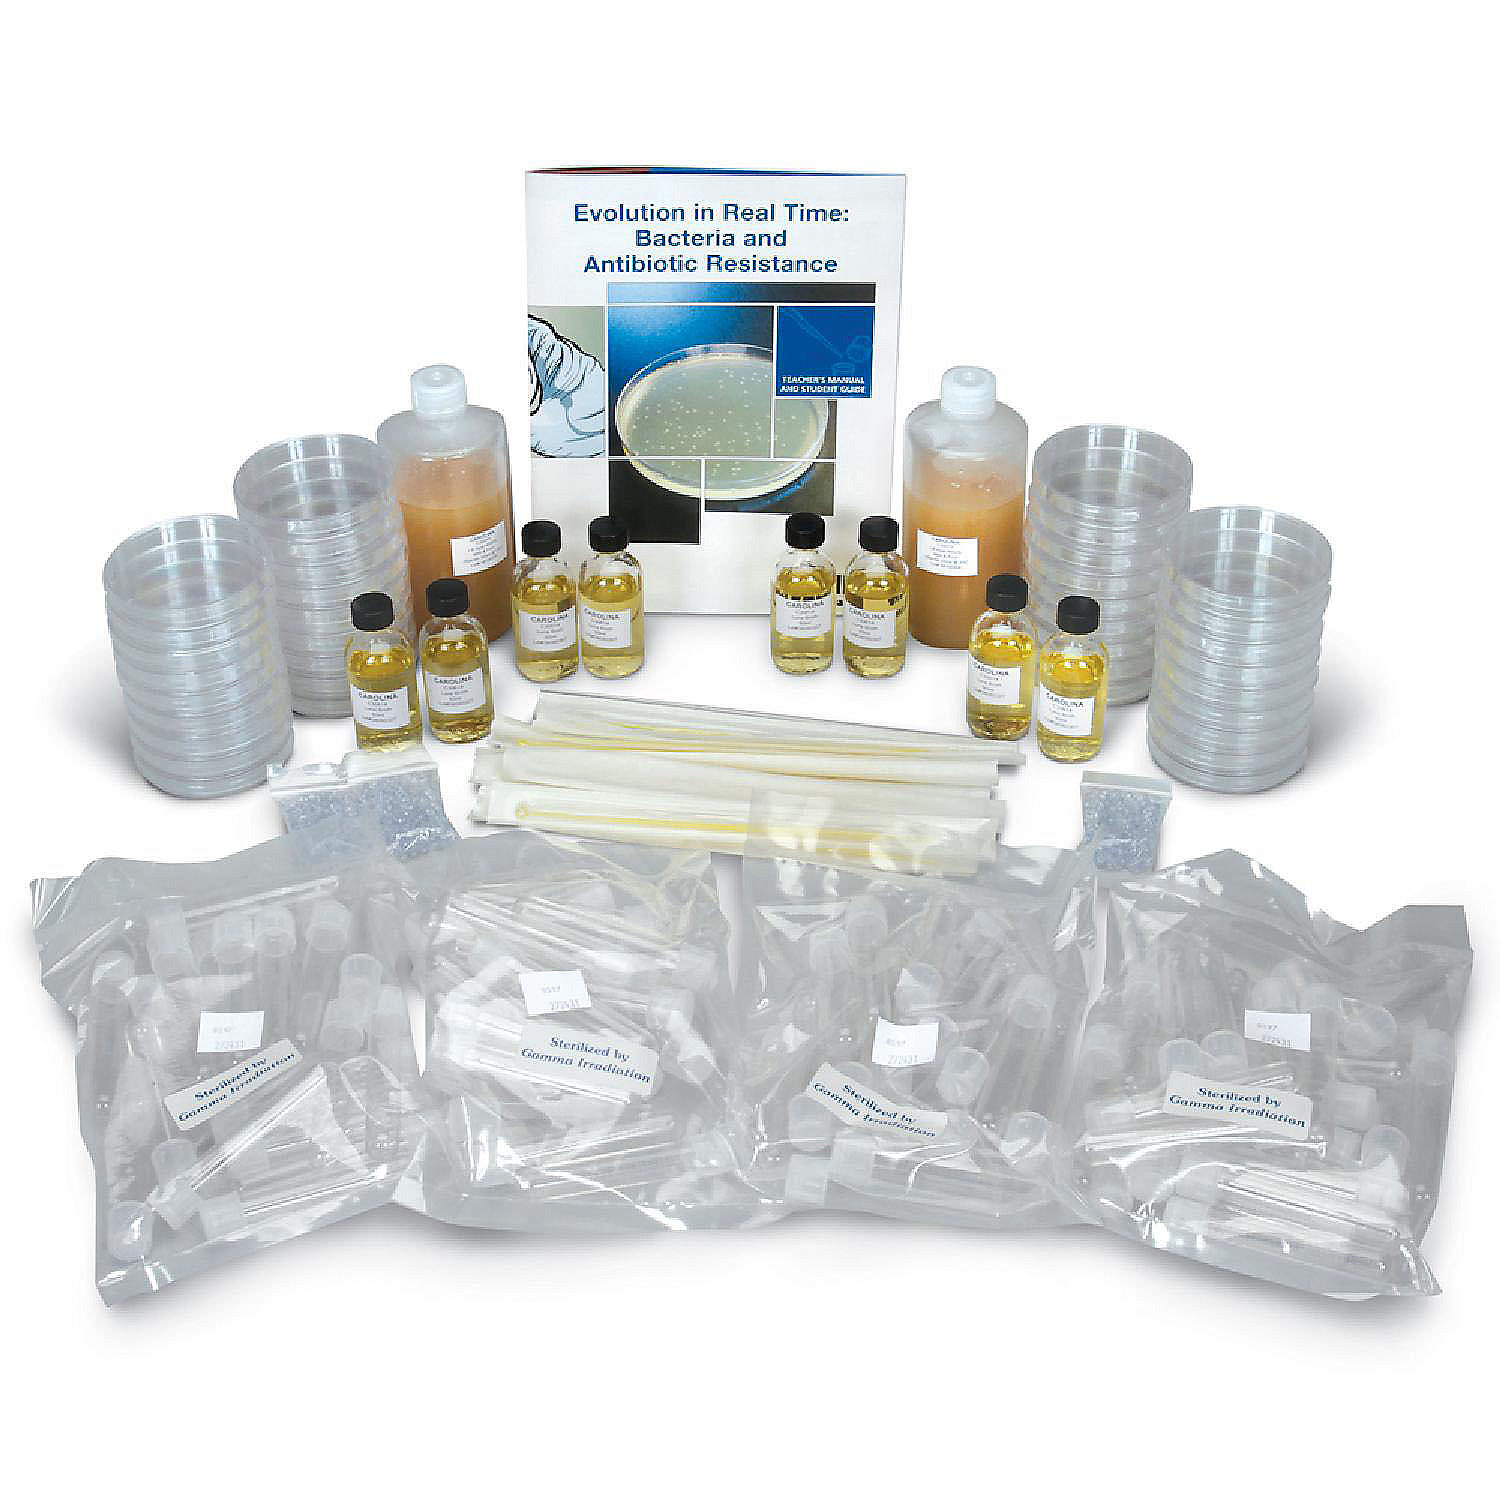 Arashigaoka leveren Gebeurt Carolina Biological Supply Company Evolution in Real Time: Bacteria and  Antibiotic Resistance 8-Station Kit (with voucher) | Oriental Trading